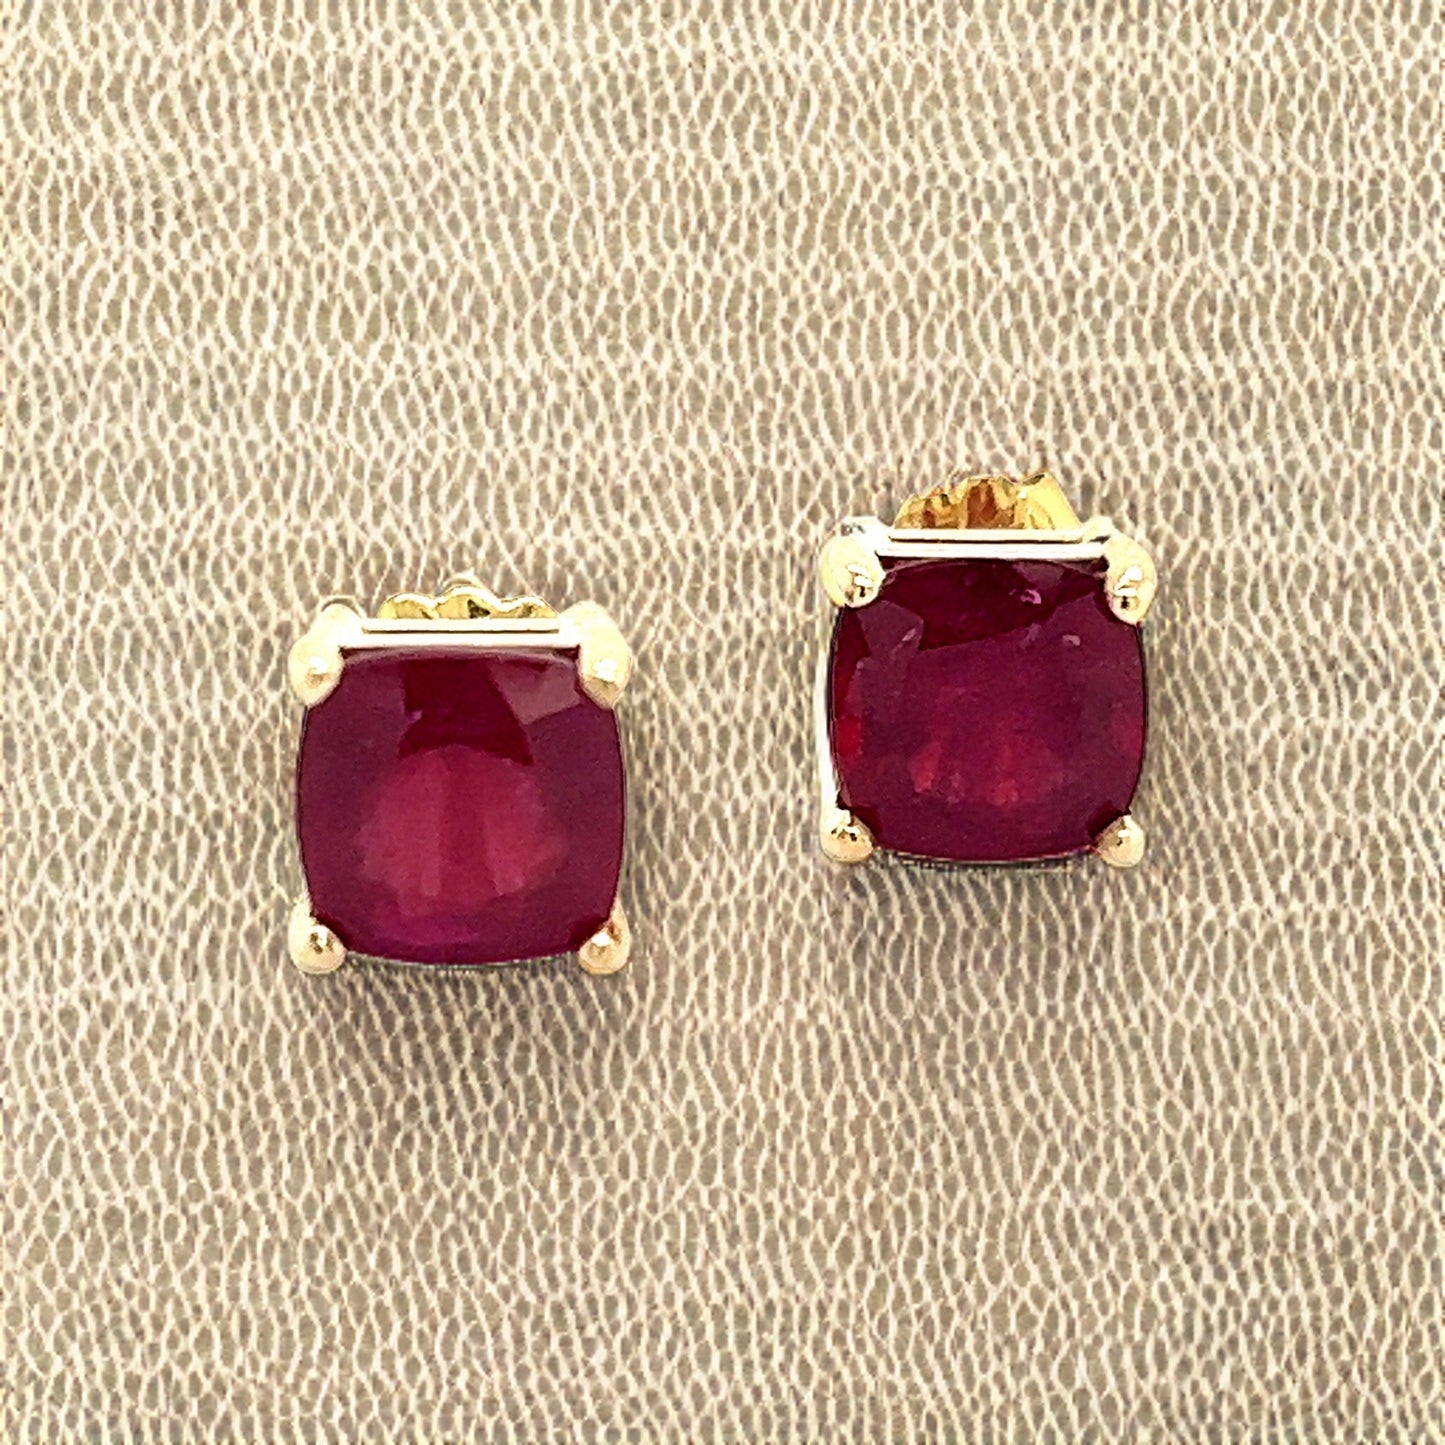 Natural Ruby Stud Earrings 14k Yellow Gold 4.18 TW Certified $799 307909